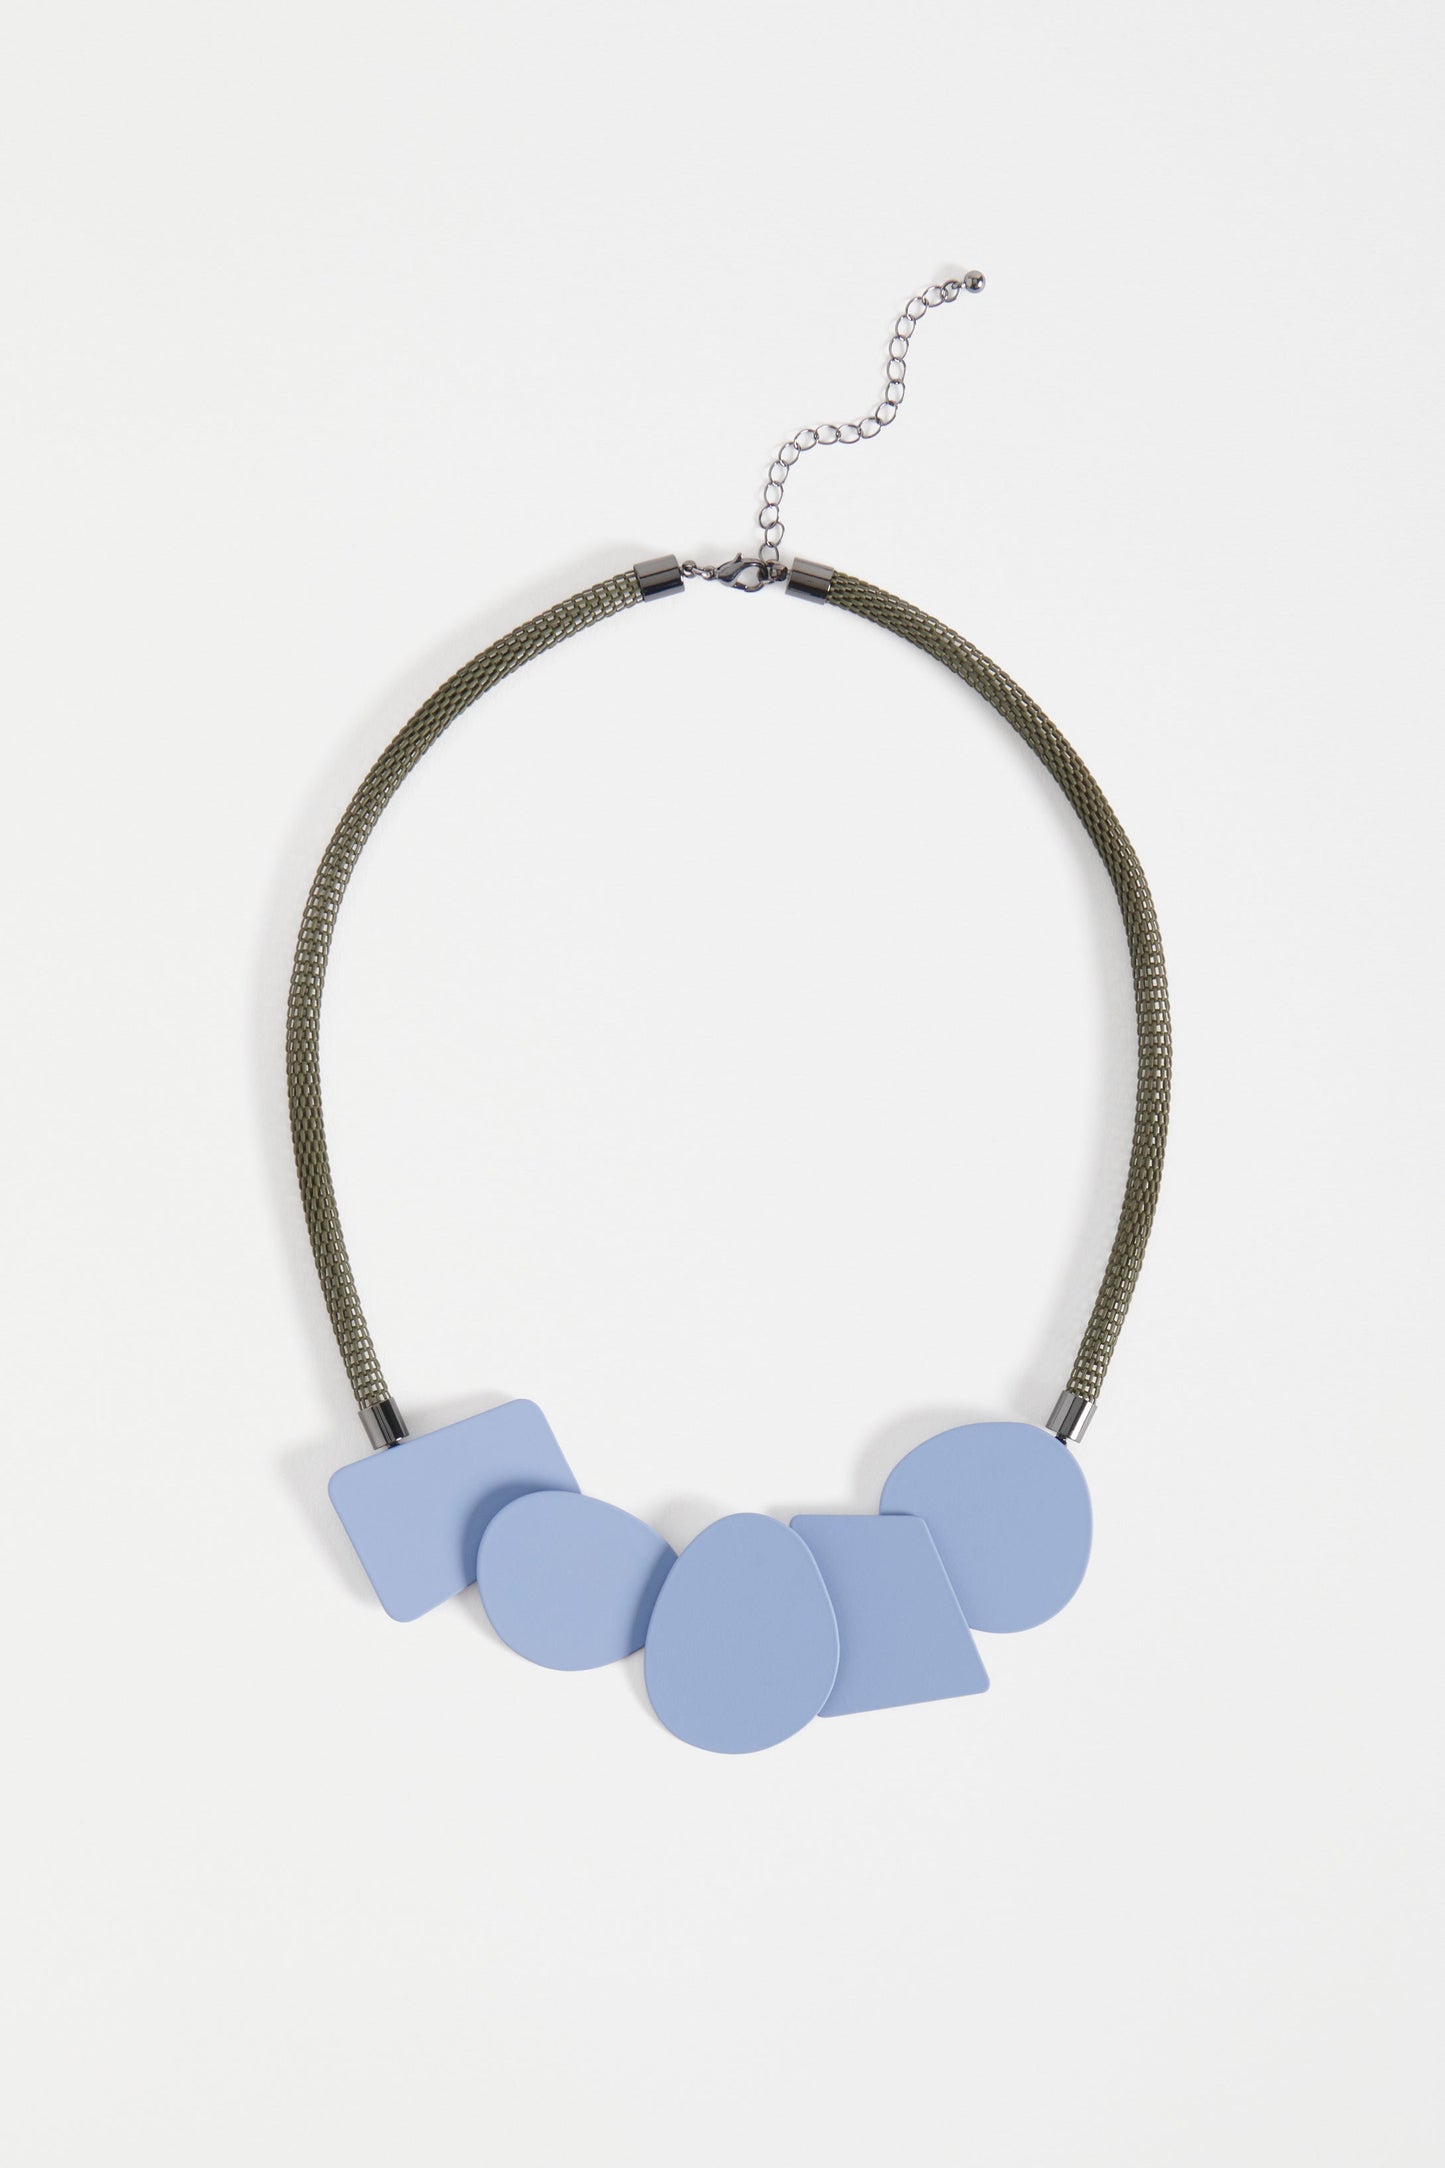 Hilllt Statement Snake Chain and Geometric Shape Short Necklace | ICE BLUE